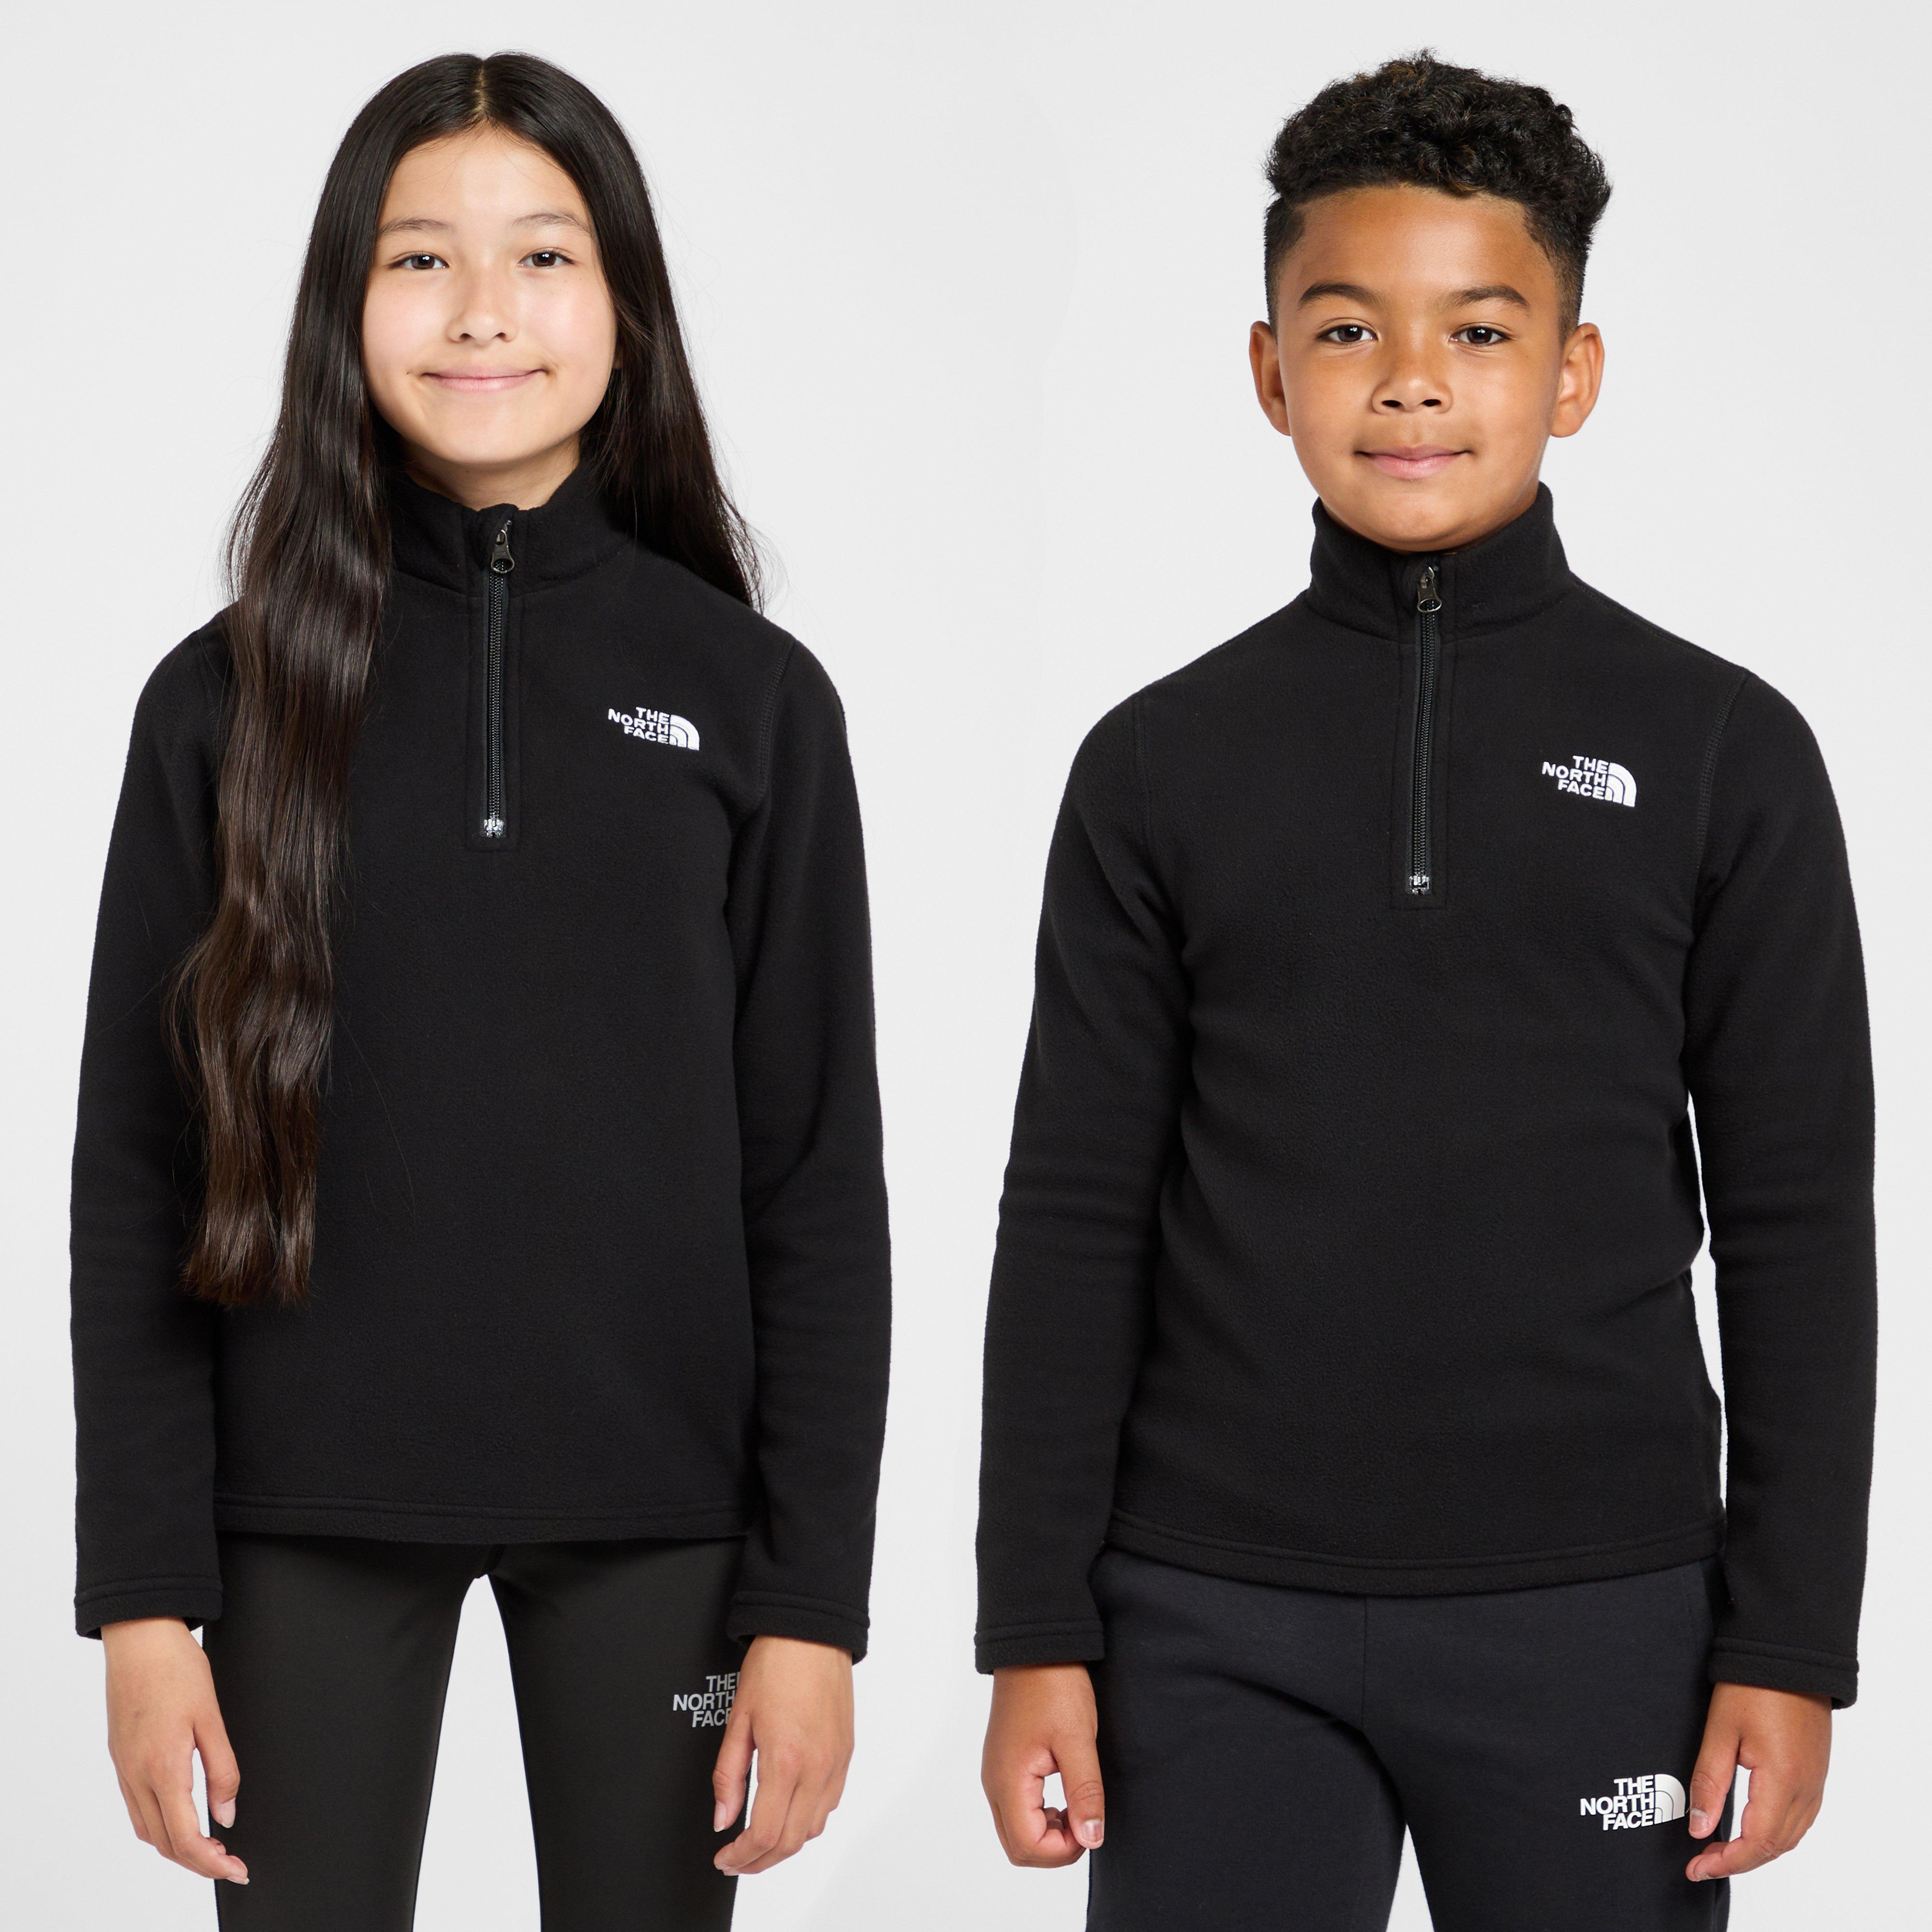 The North Face The North Face Kids